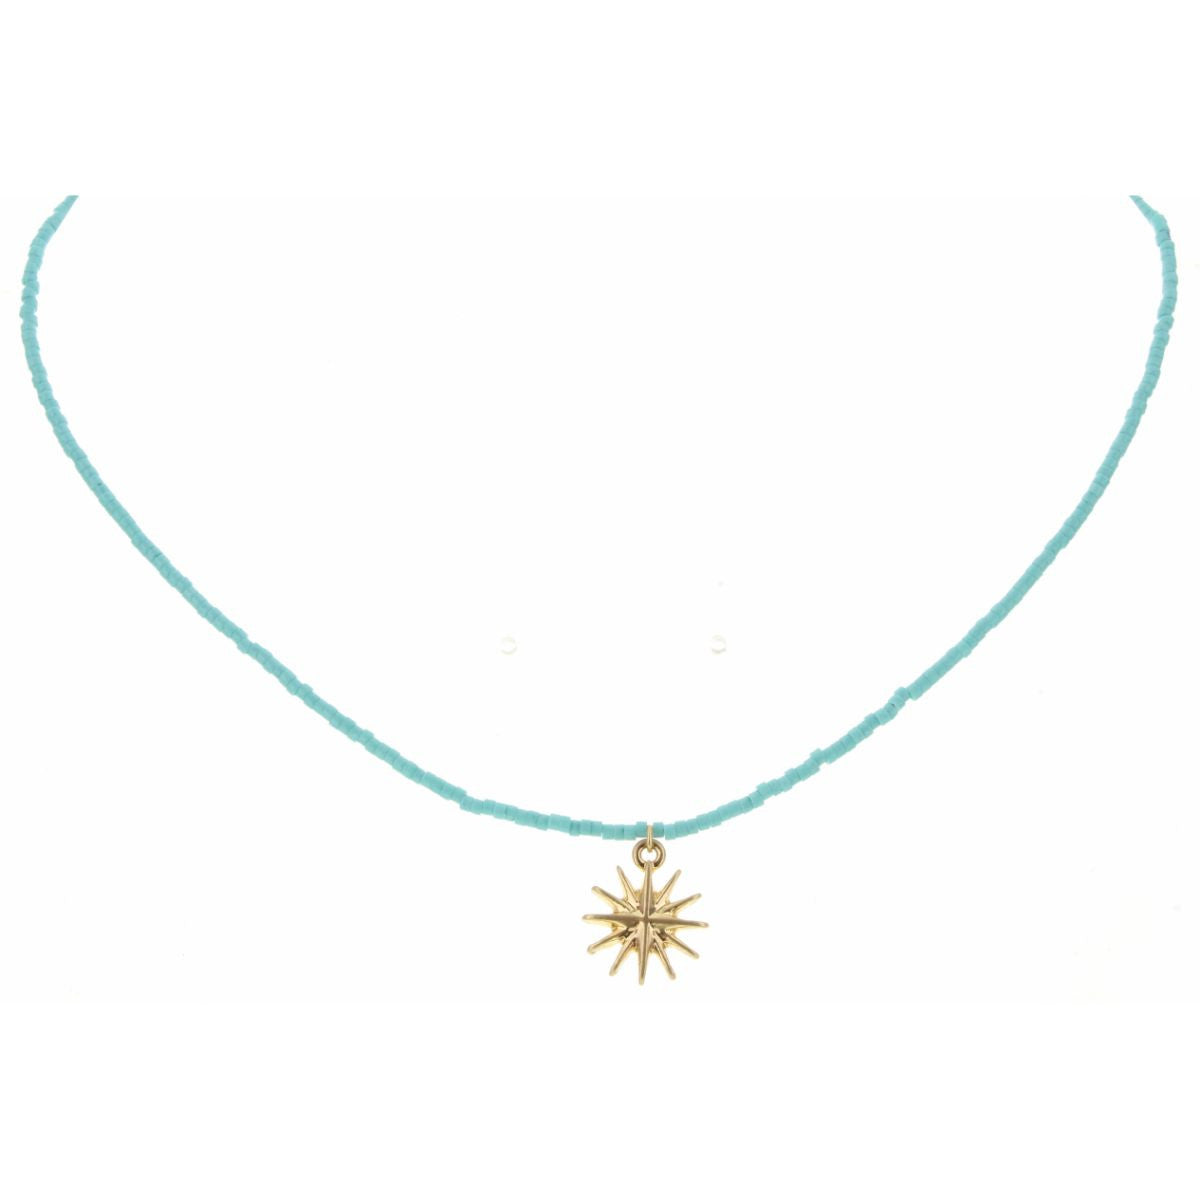 Kids 14" Turquoise Seed Bead With Sunburst Charm Necklace, 3" Ext